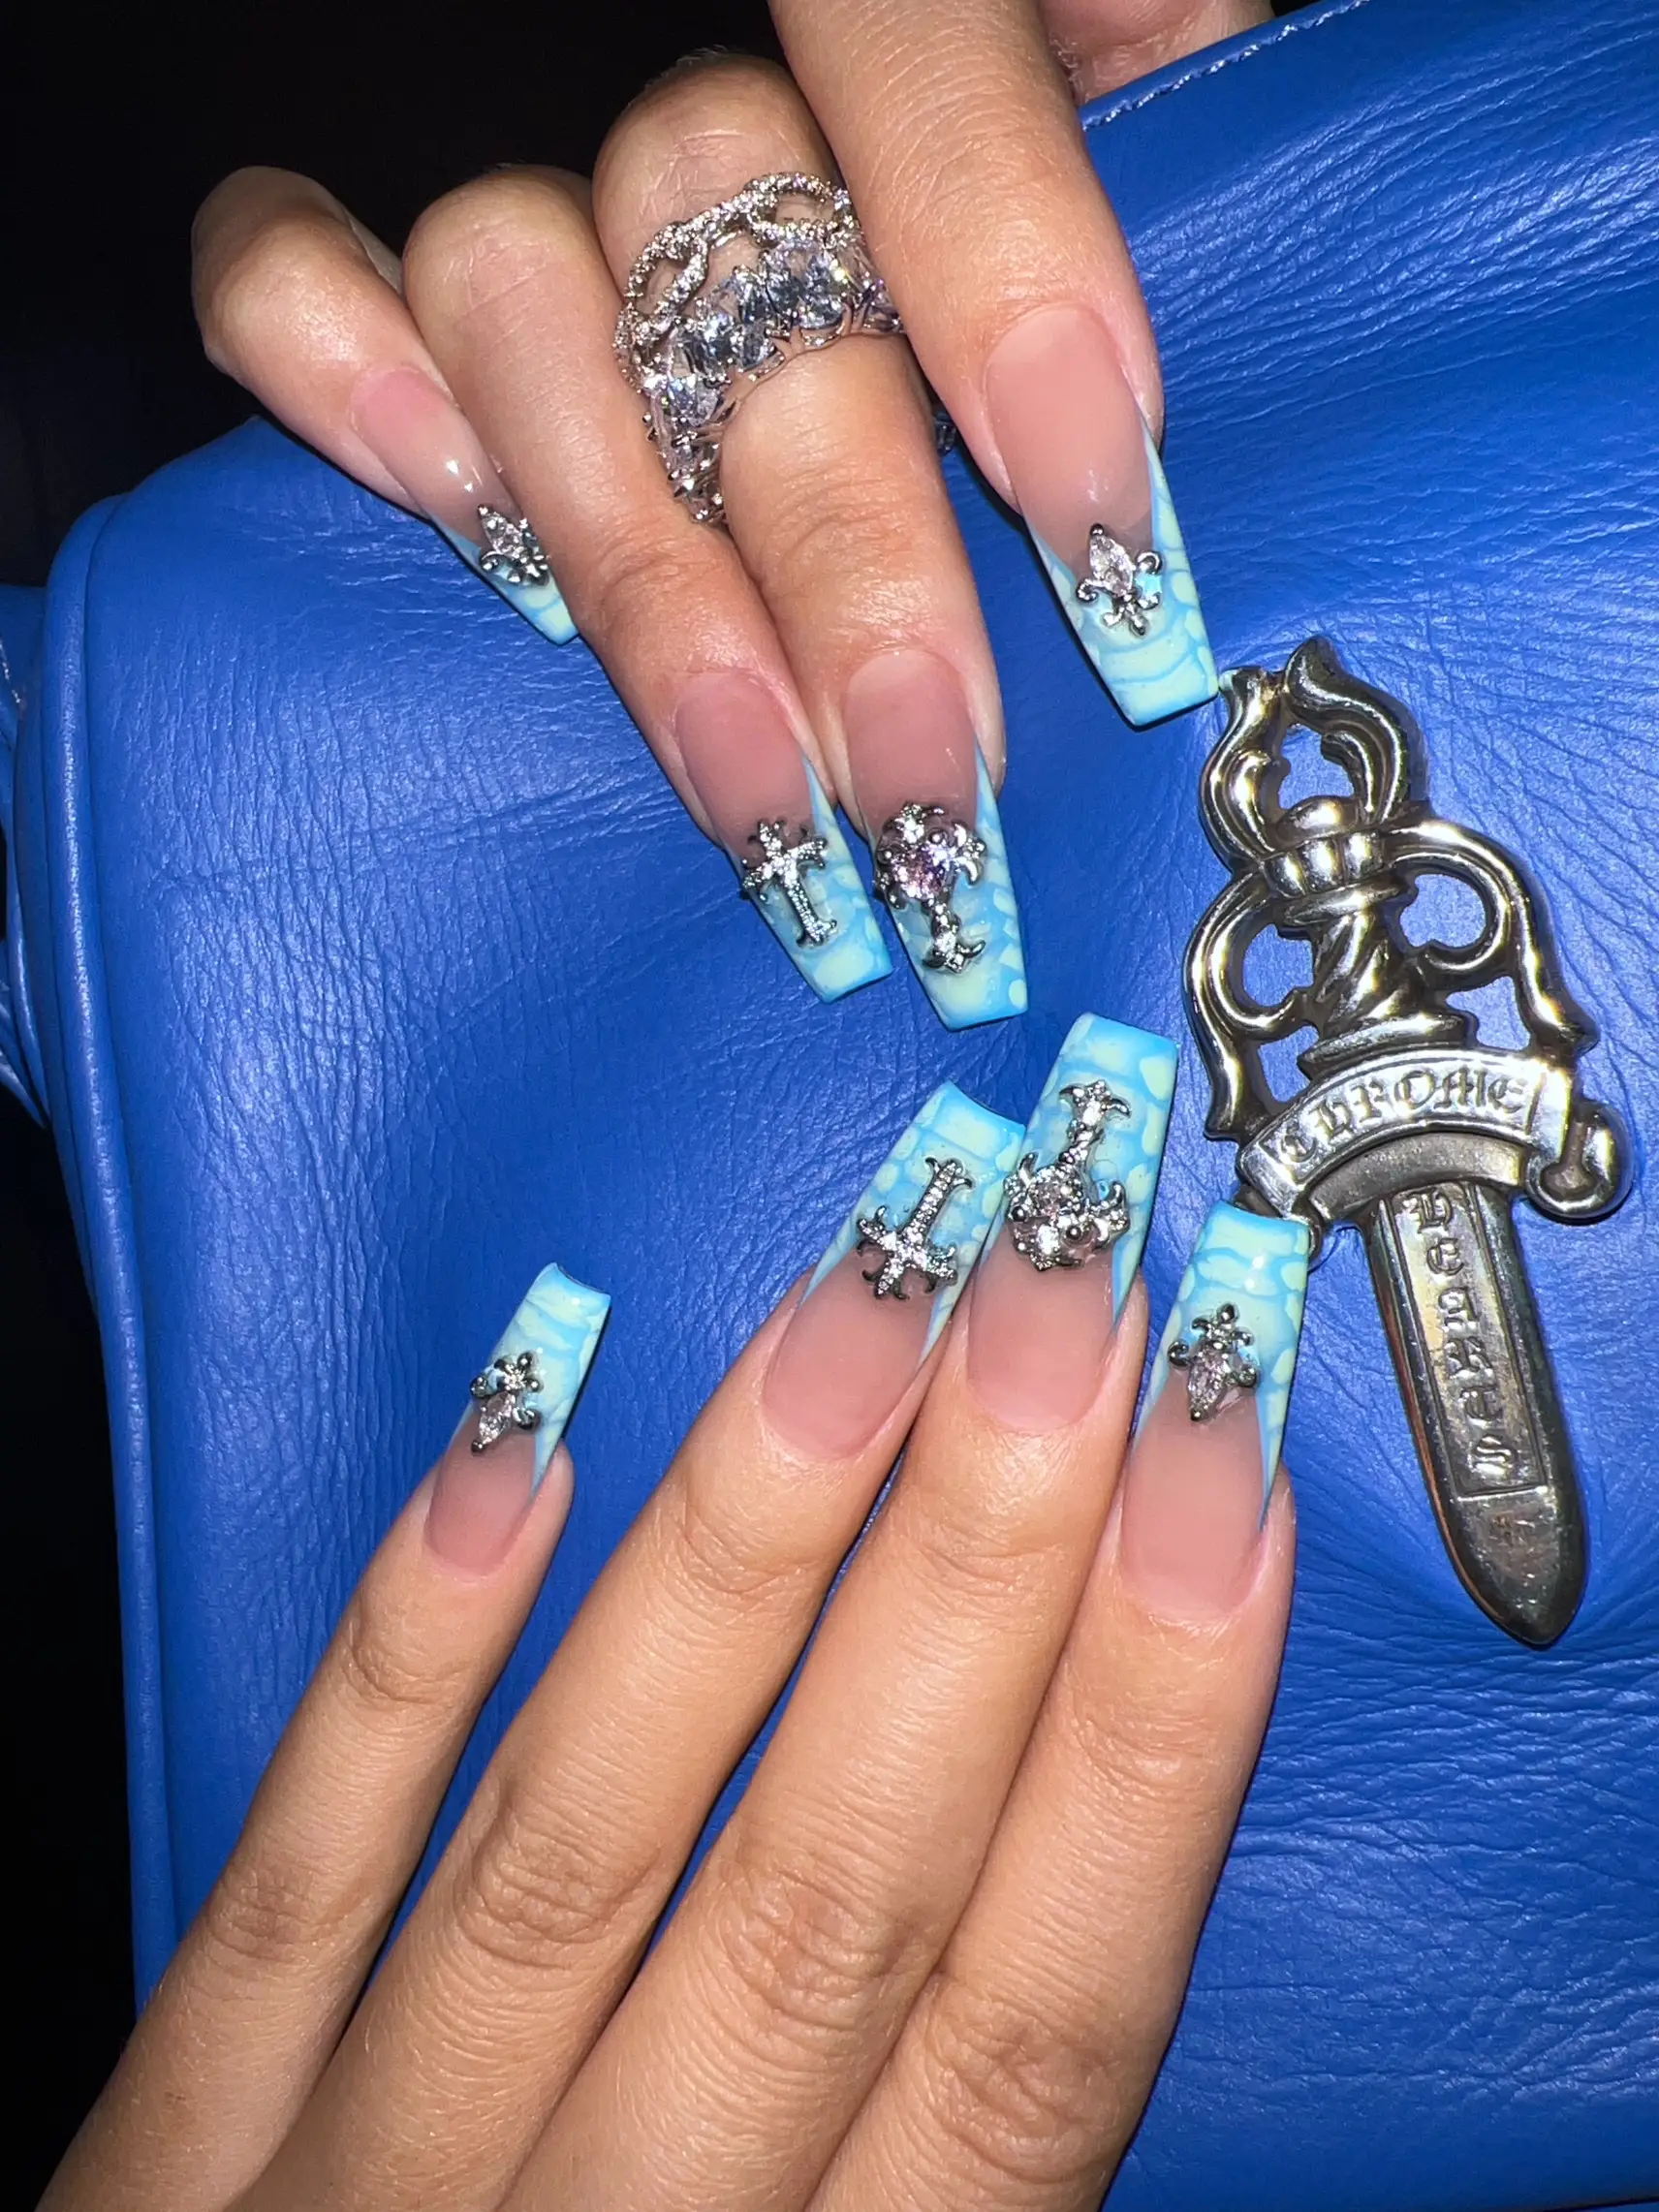 Nails Inspo | Chrome Hearts + Blue Croco | Gallery posted by LOLO